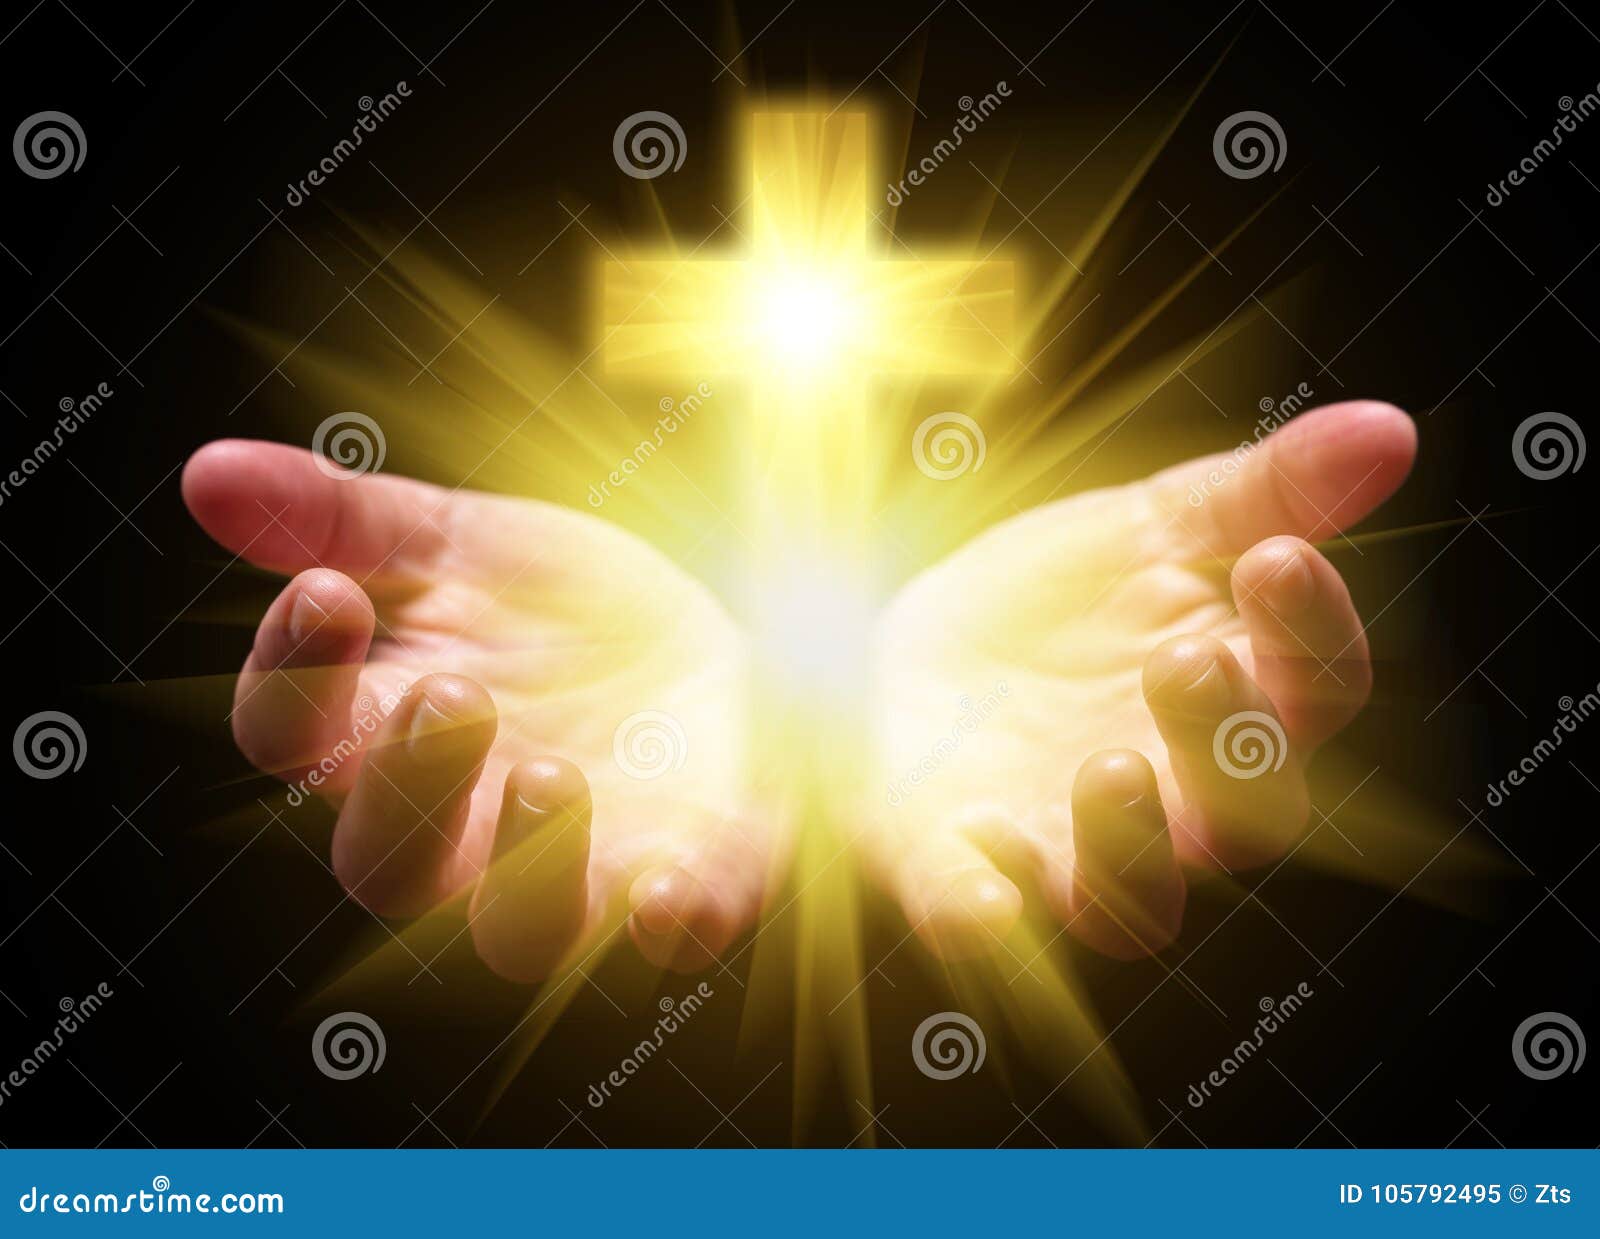 hands cupped and holding or showing cross or crucifix. concept for christian, christianity, catholic